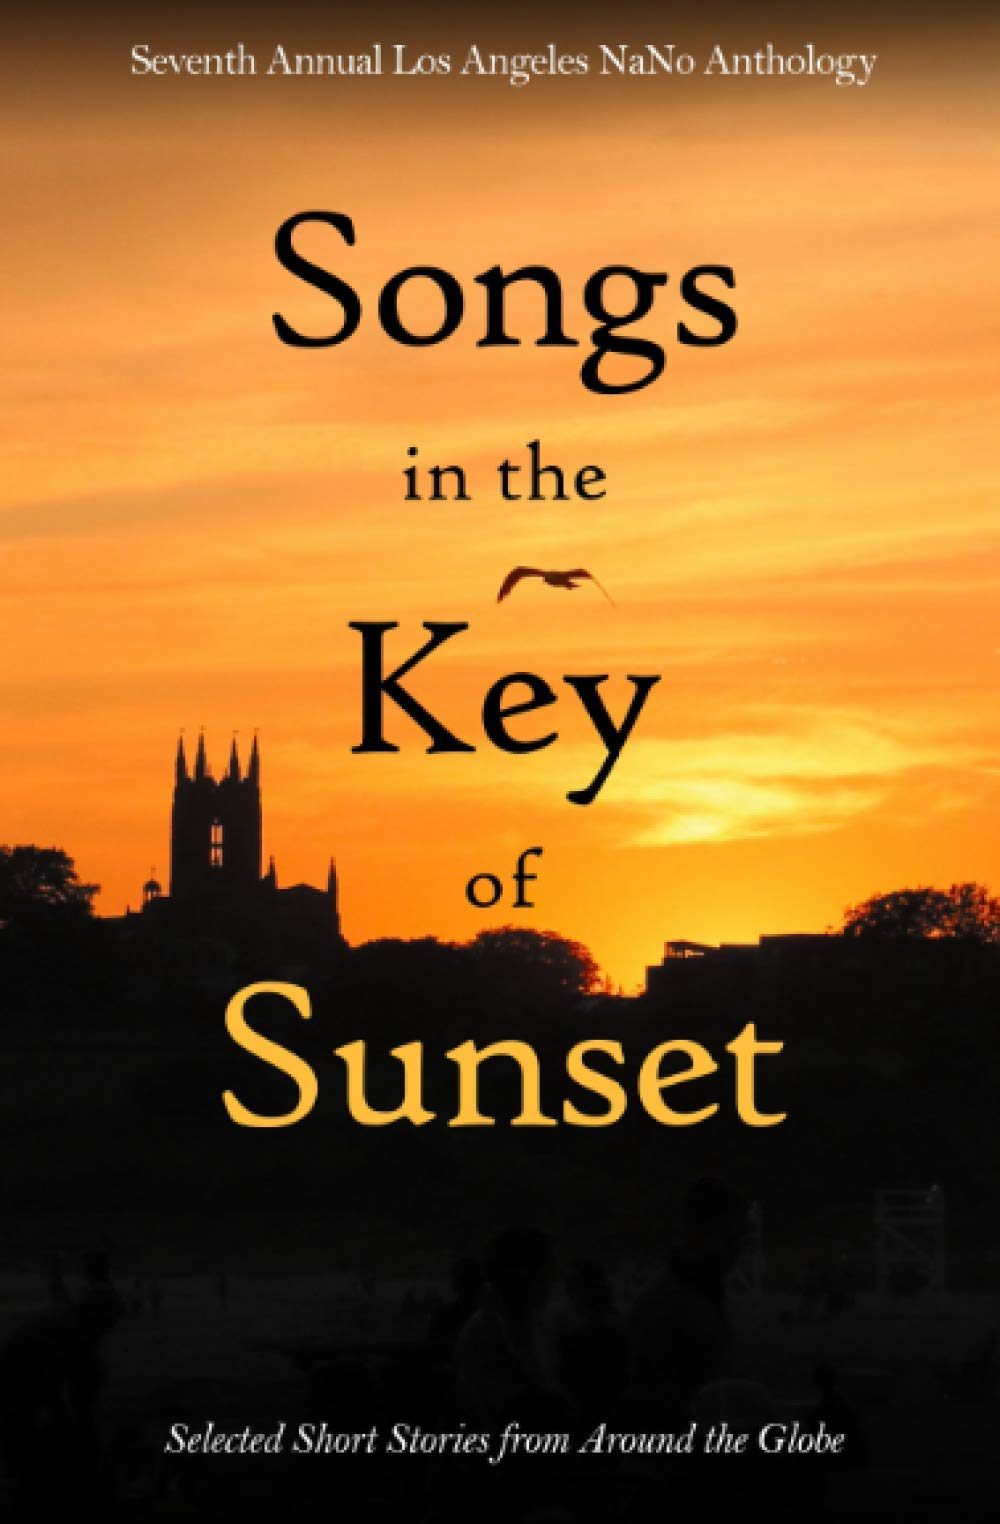 Songs in the Key of Sunset